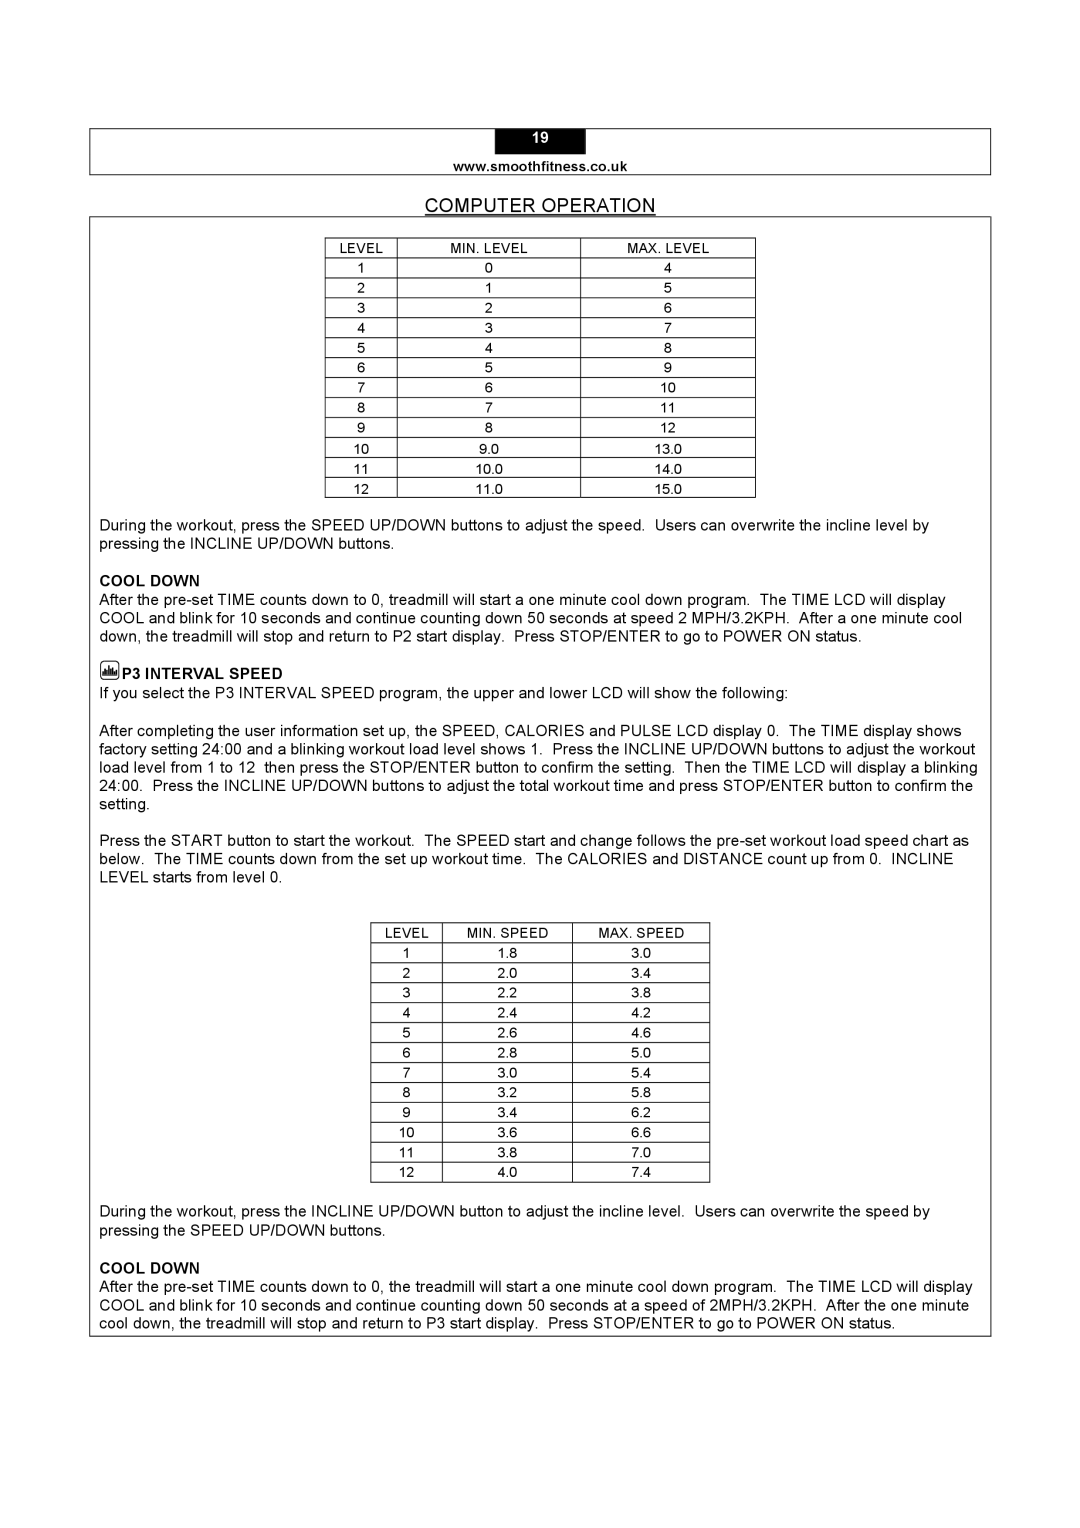 Smooth Fitness 5.15E user manual Cool Down, P3 Interval Speed 